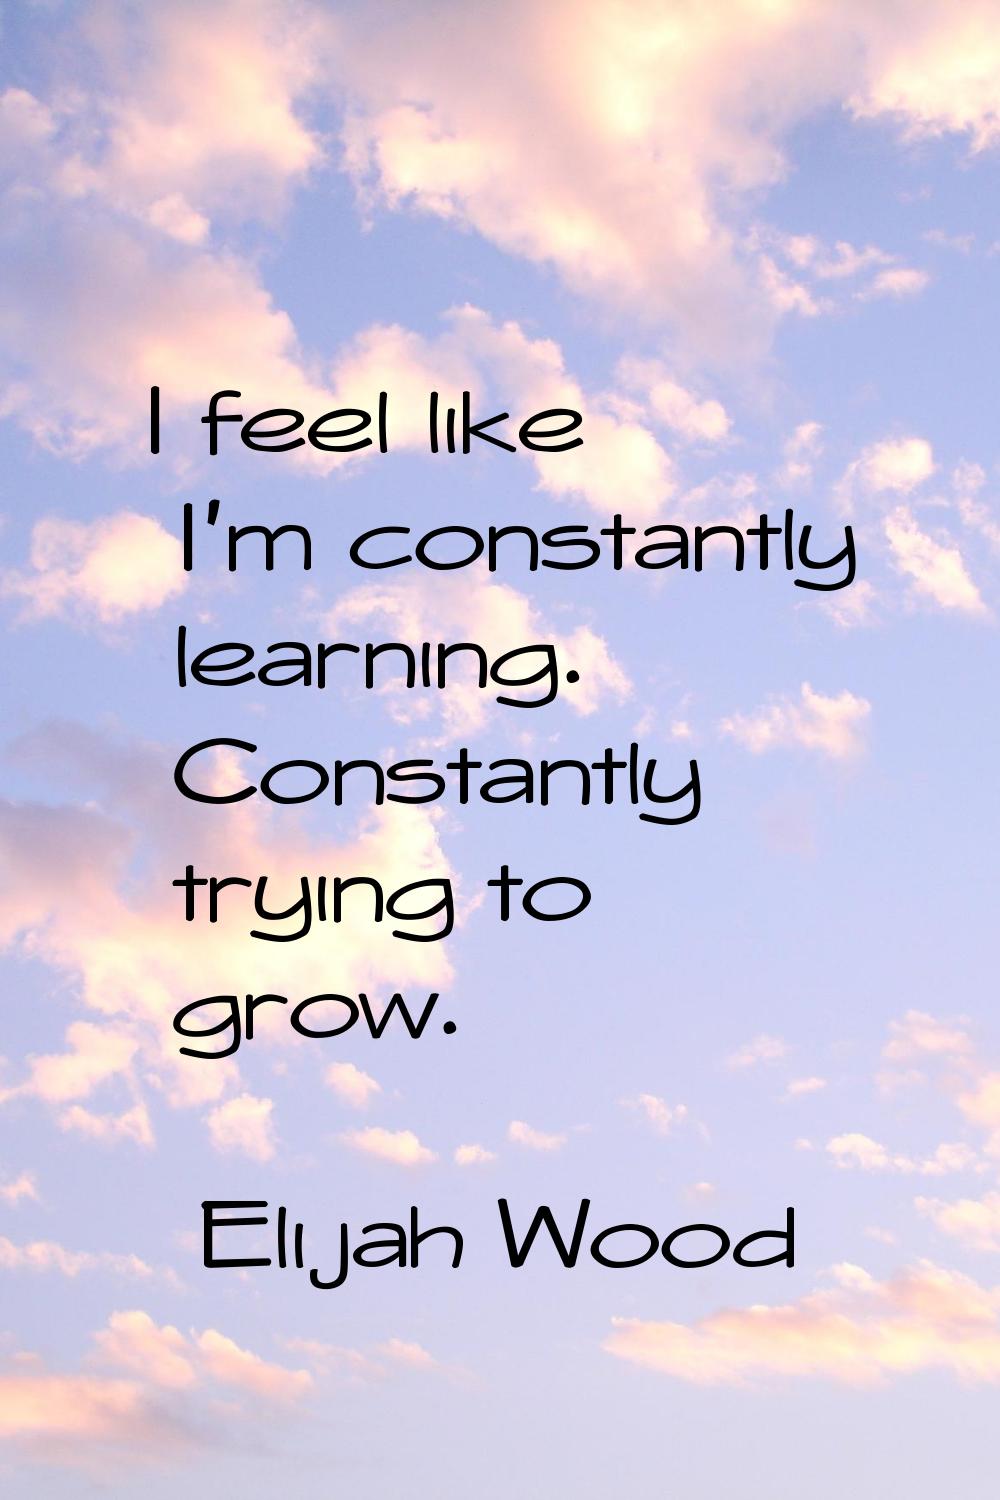 I feel like I'm constantly learning. Constantly trying to grow.